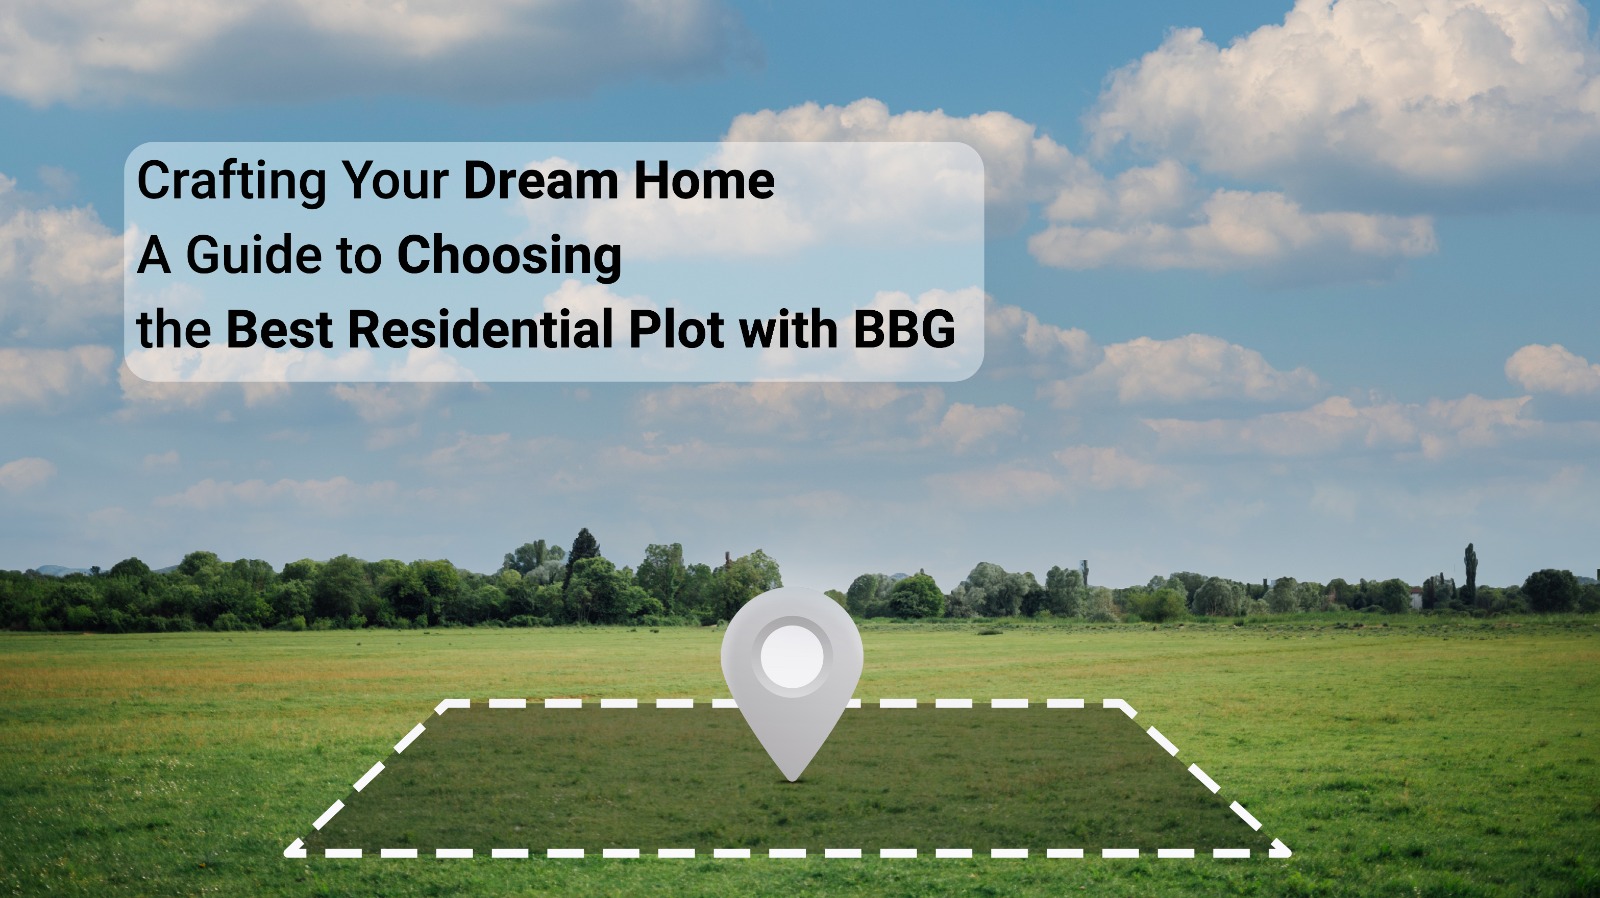 Crafting Your Dream Home: A Guide to Choosing the Best Residential Plot with BBG